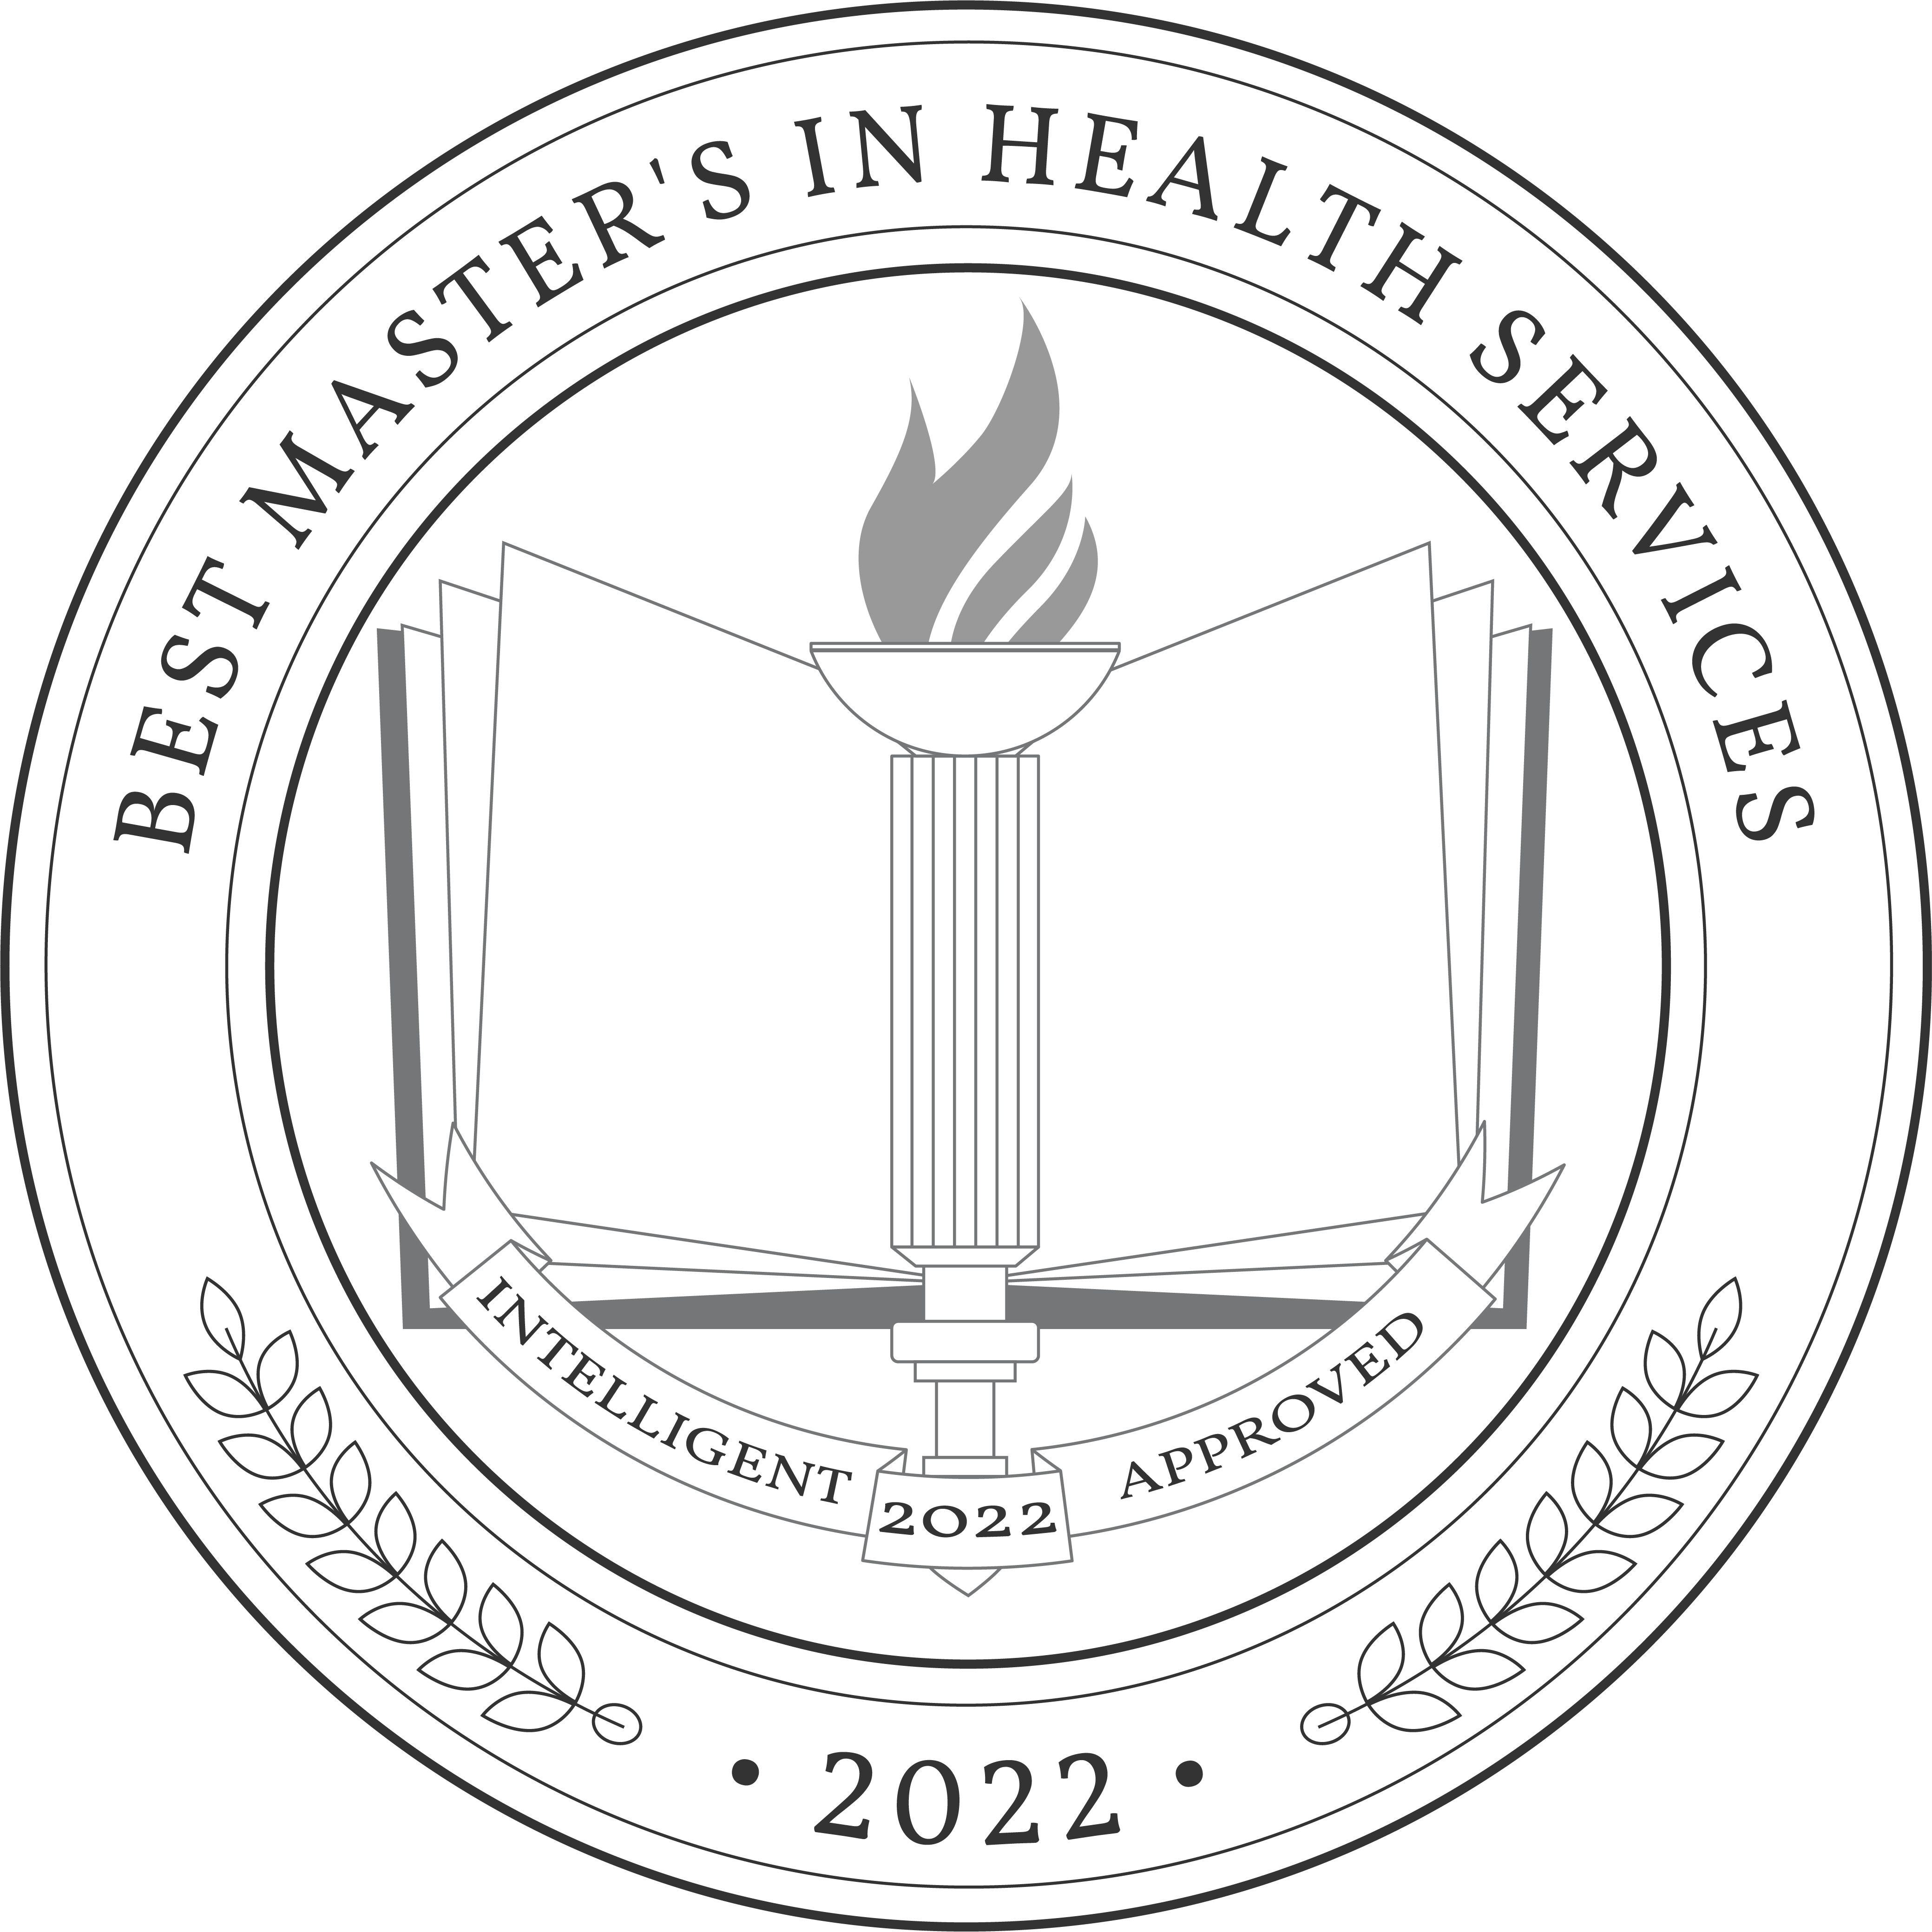 Best Online Master's in Health Services Degree Programs